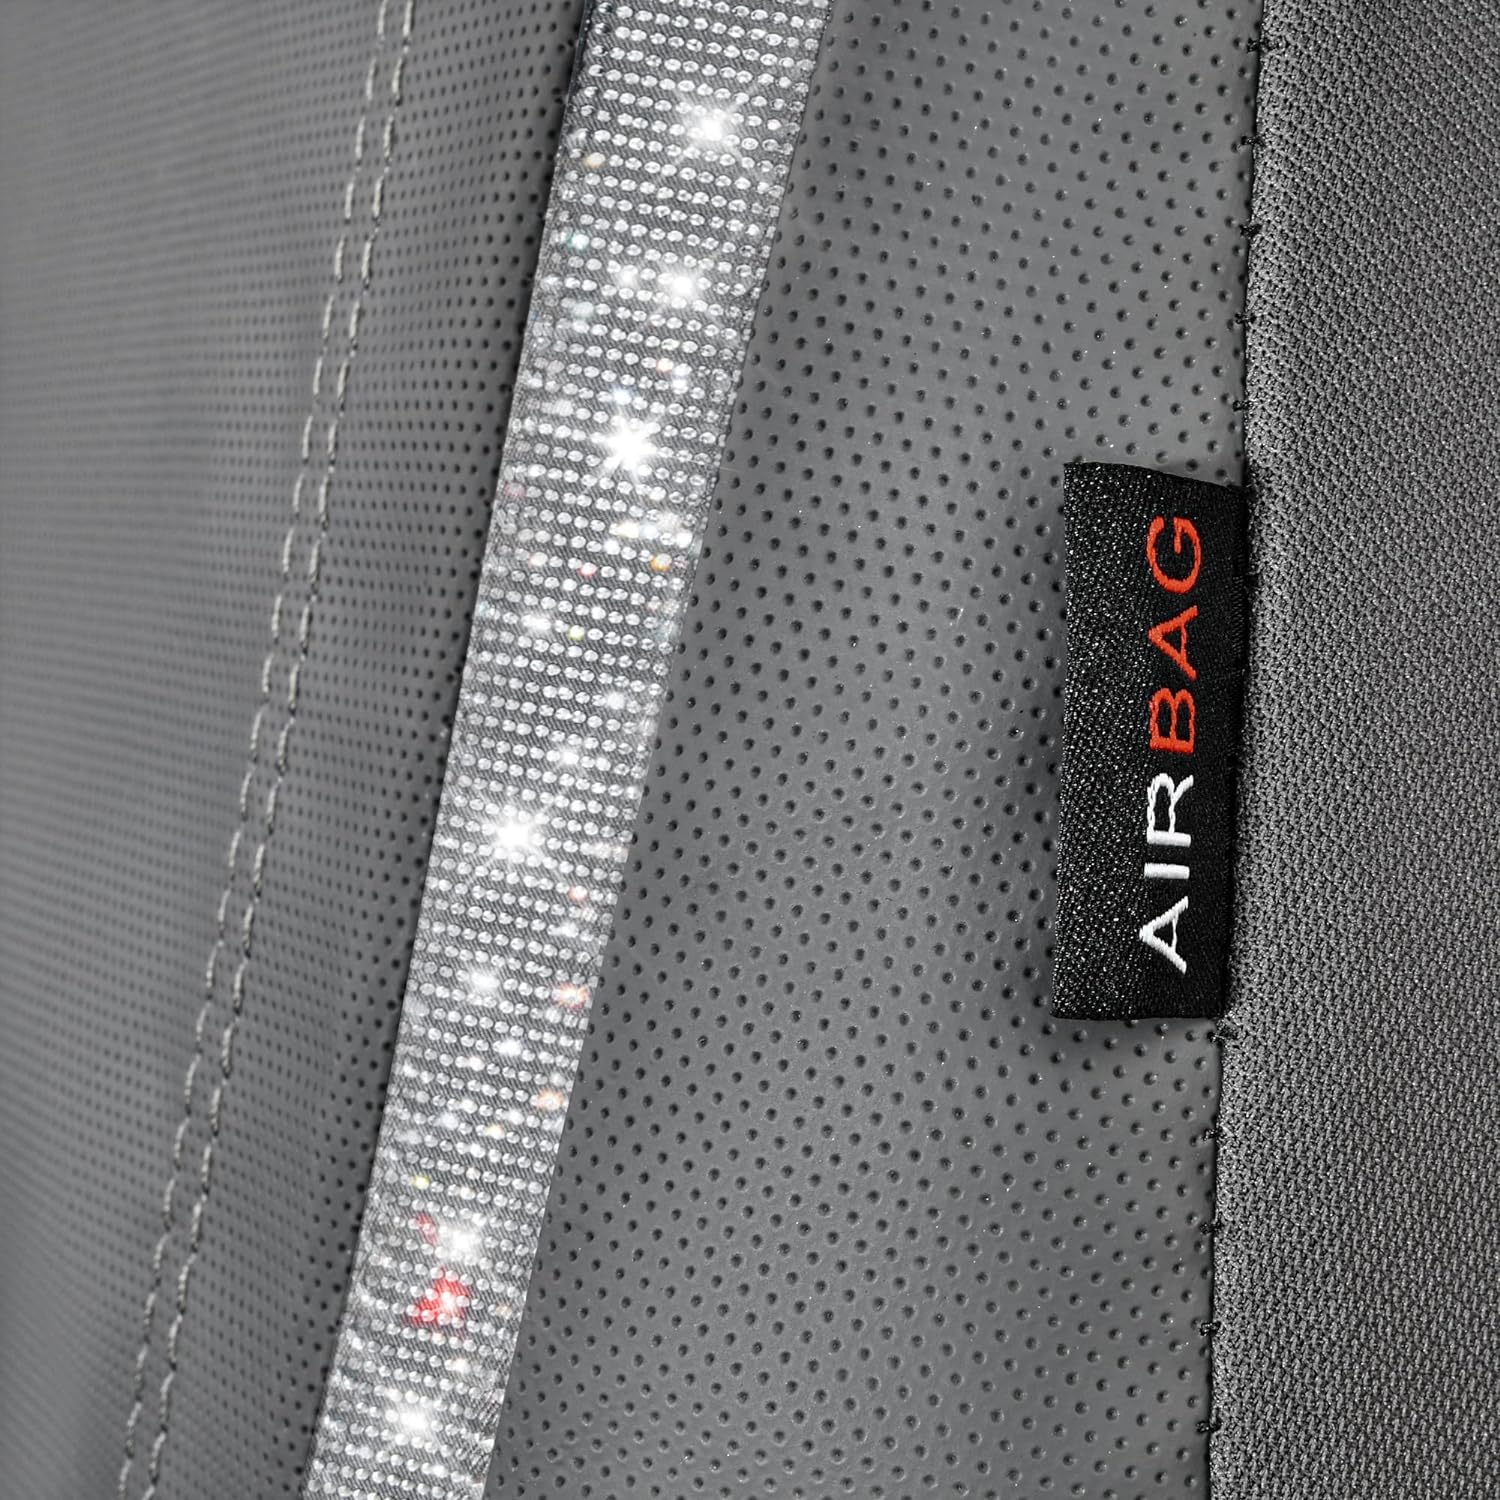 CAR PASS Leather Diamond Bling Car Seat Cover 2 Front Interior Sets, Waterproof Universal Shining Glitter Crystal Sparkle Fit for 95% Automotive Truck SUV Cute Women Girl